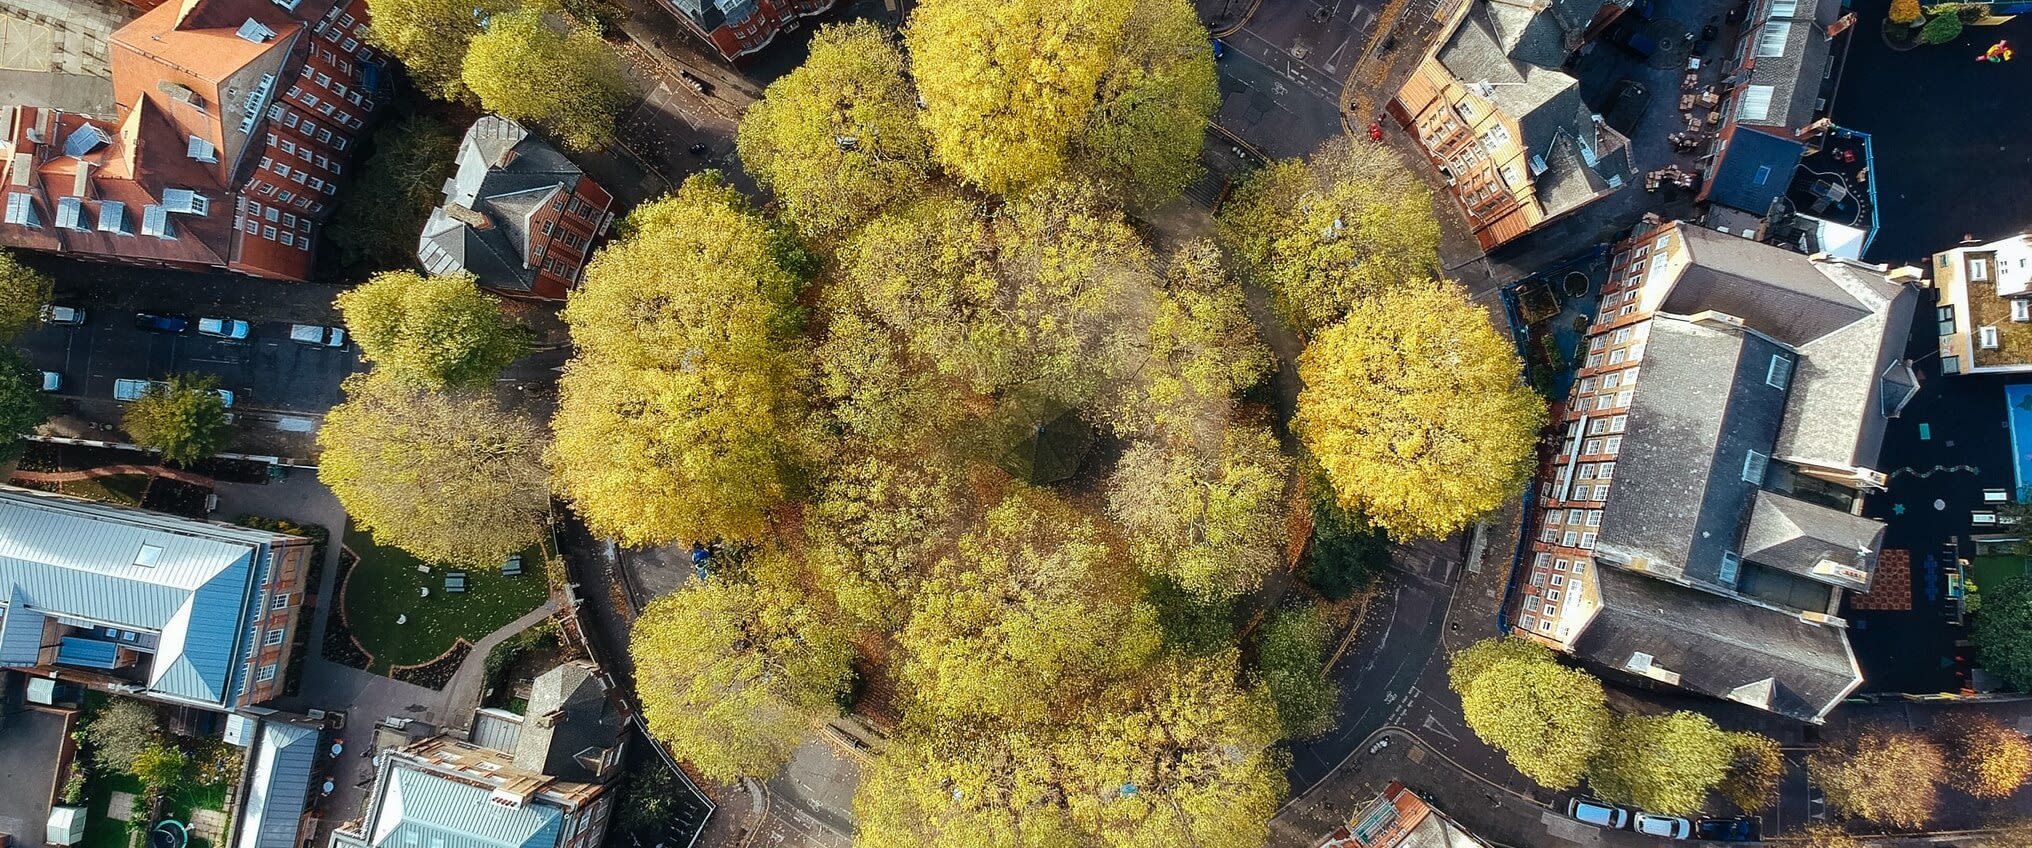 Birds eye view of tree and city